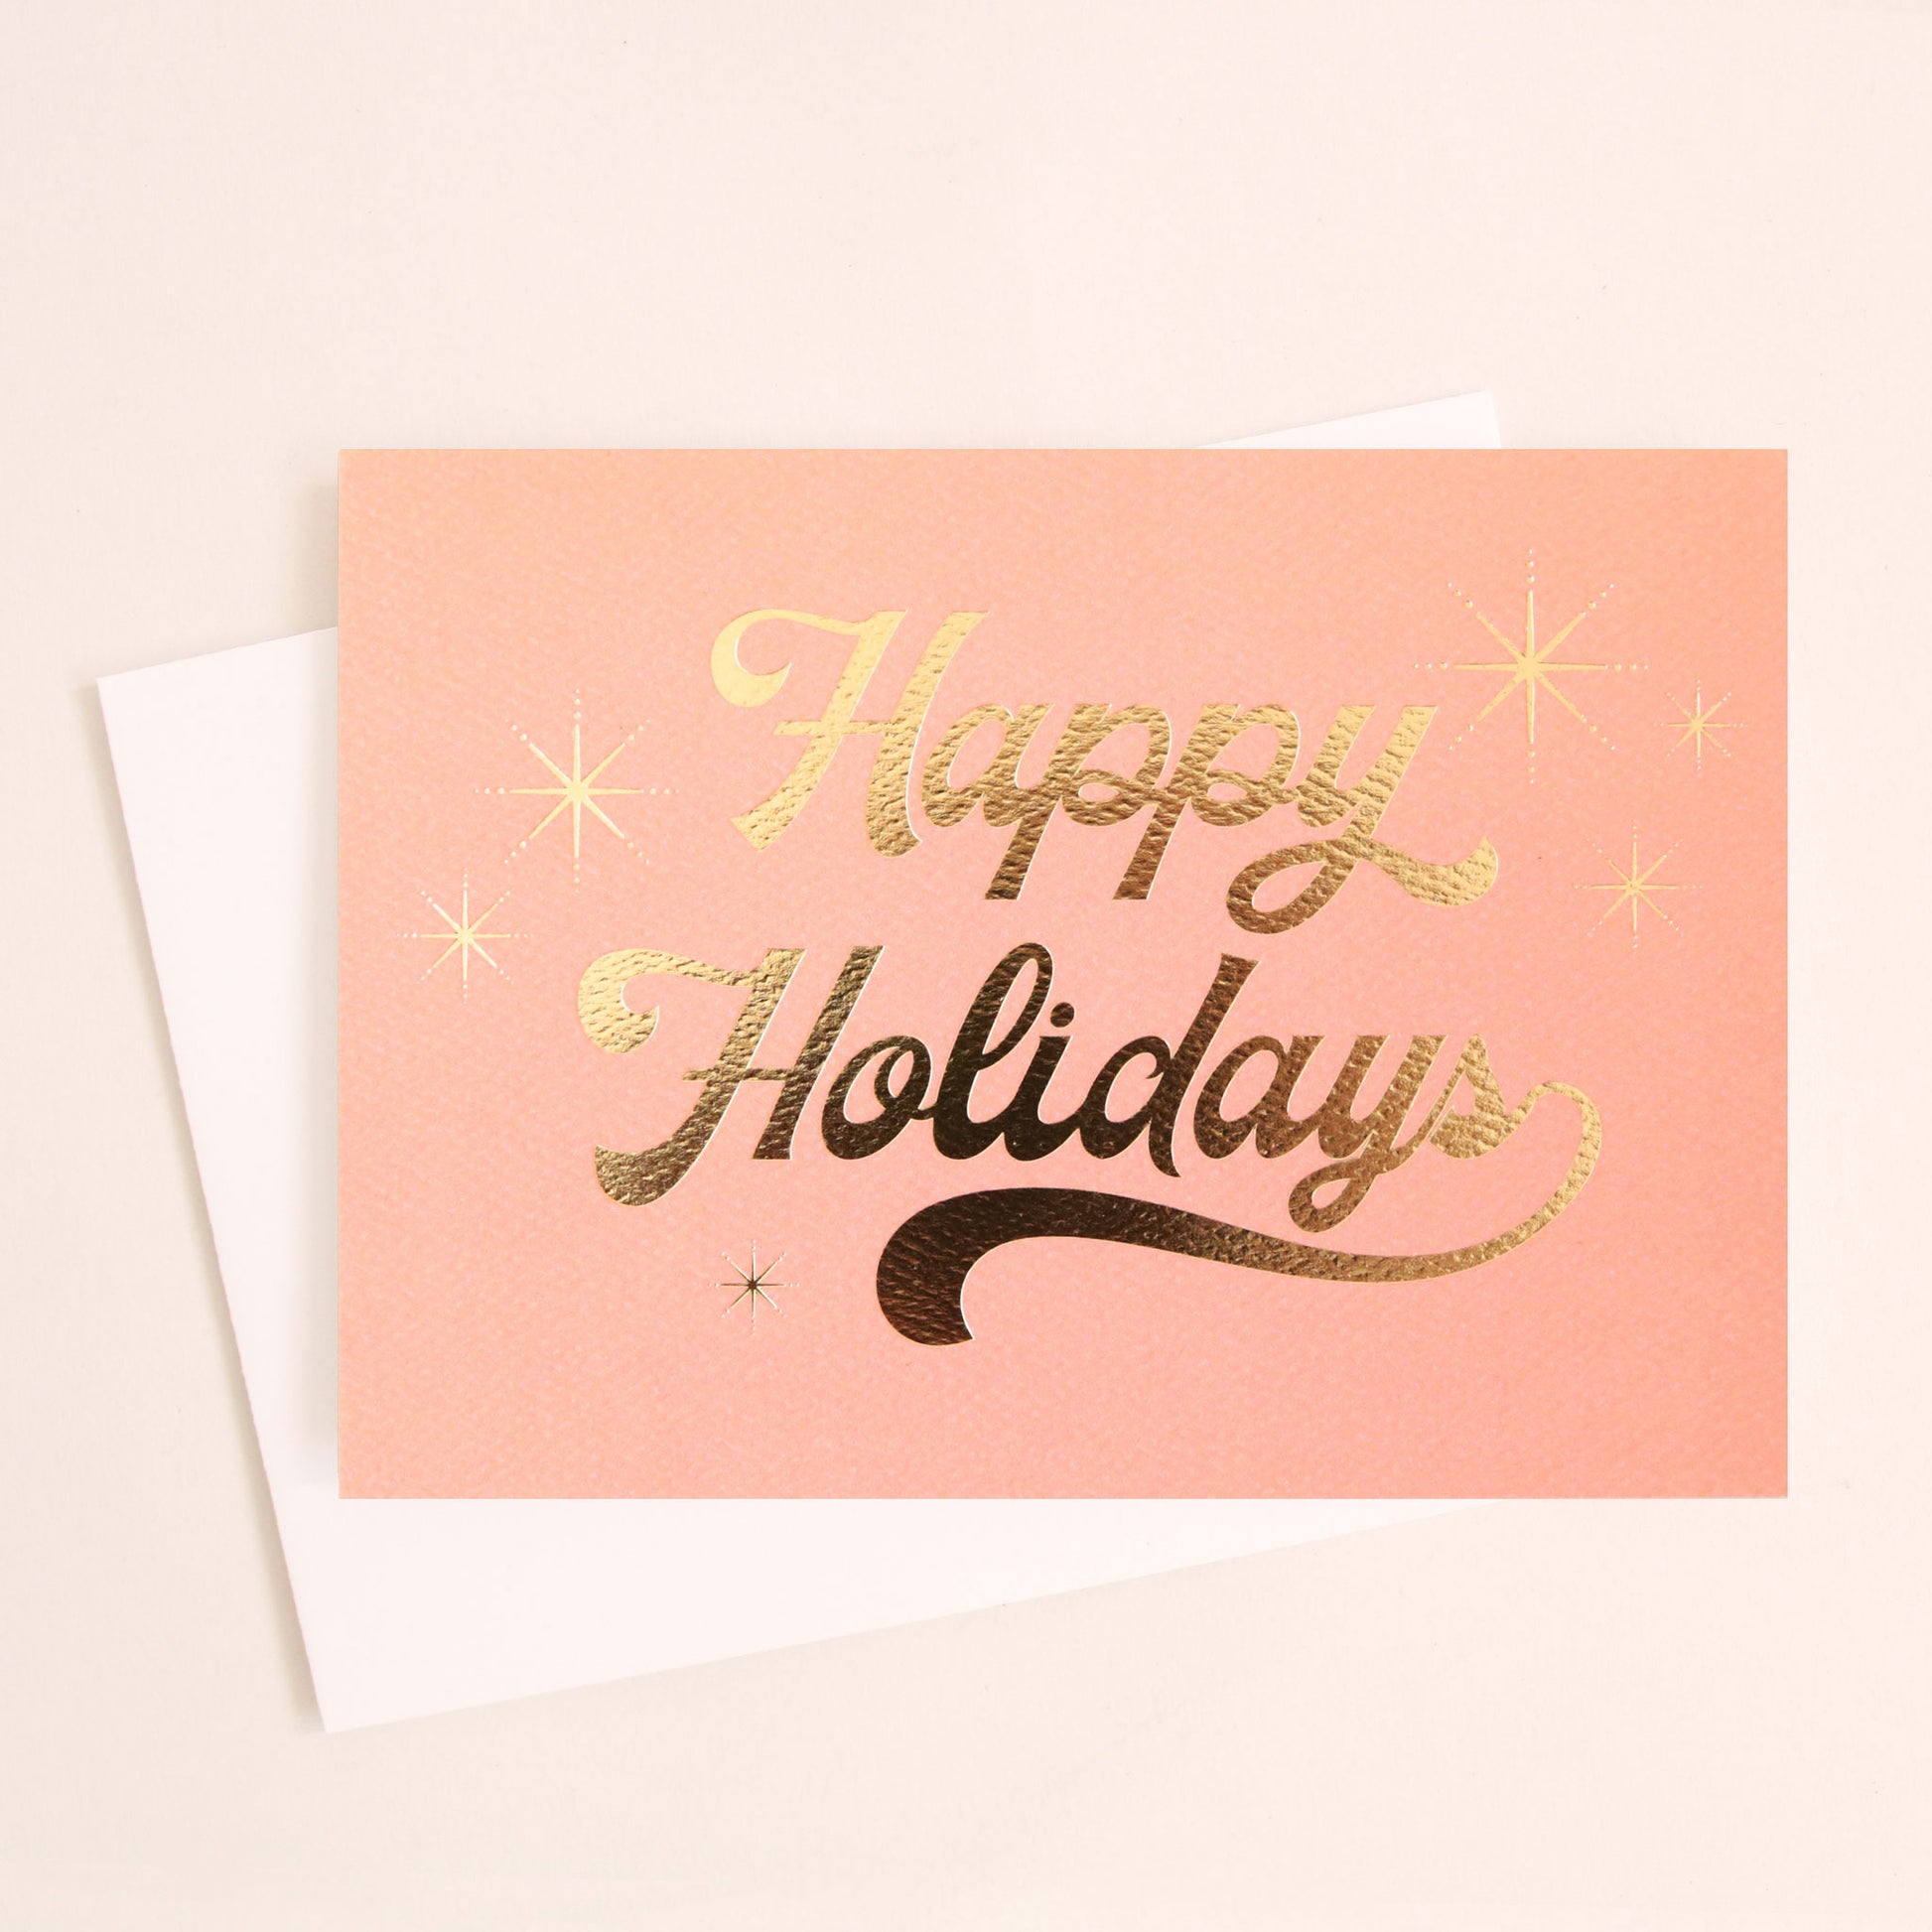 peach colored greeting card with cursive text in gold foil that reads happy holidays surrounded by six gold foil starbursts. The card is accompanied by a solid white envelope. 